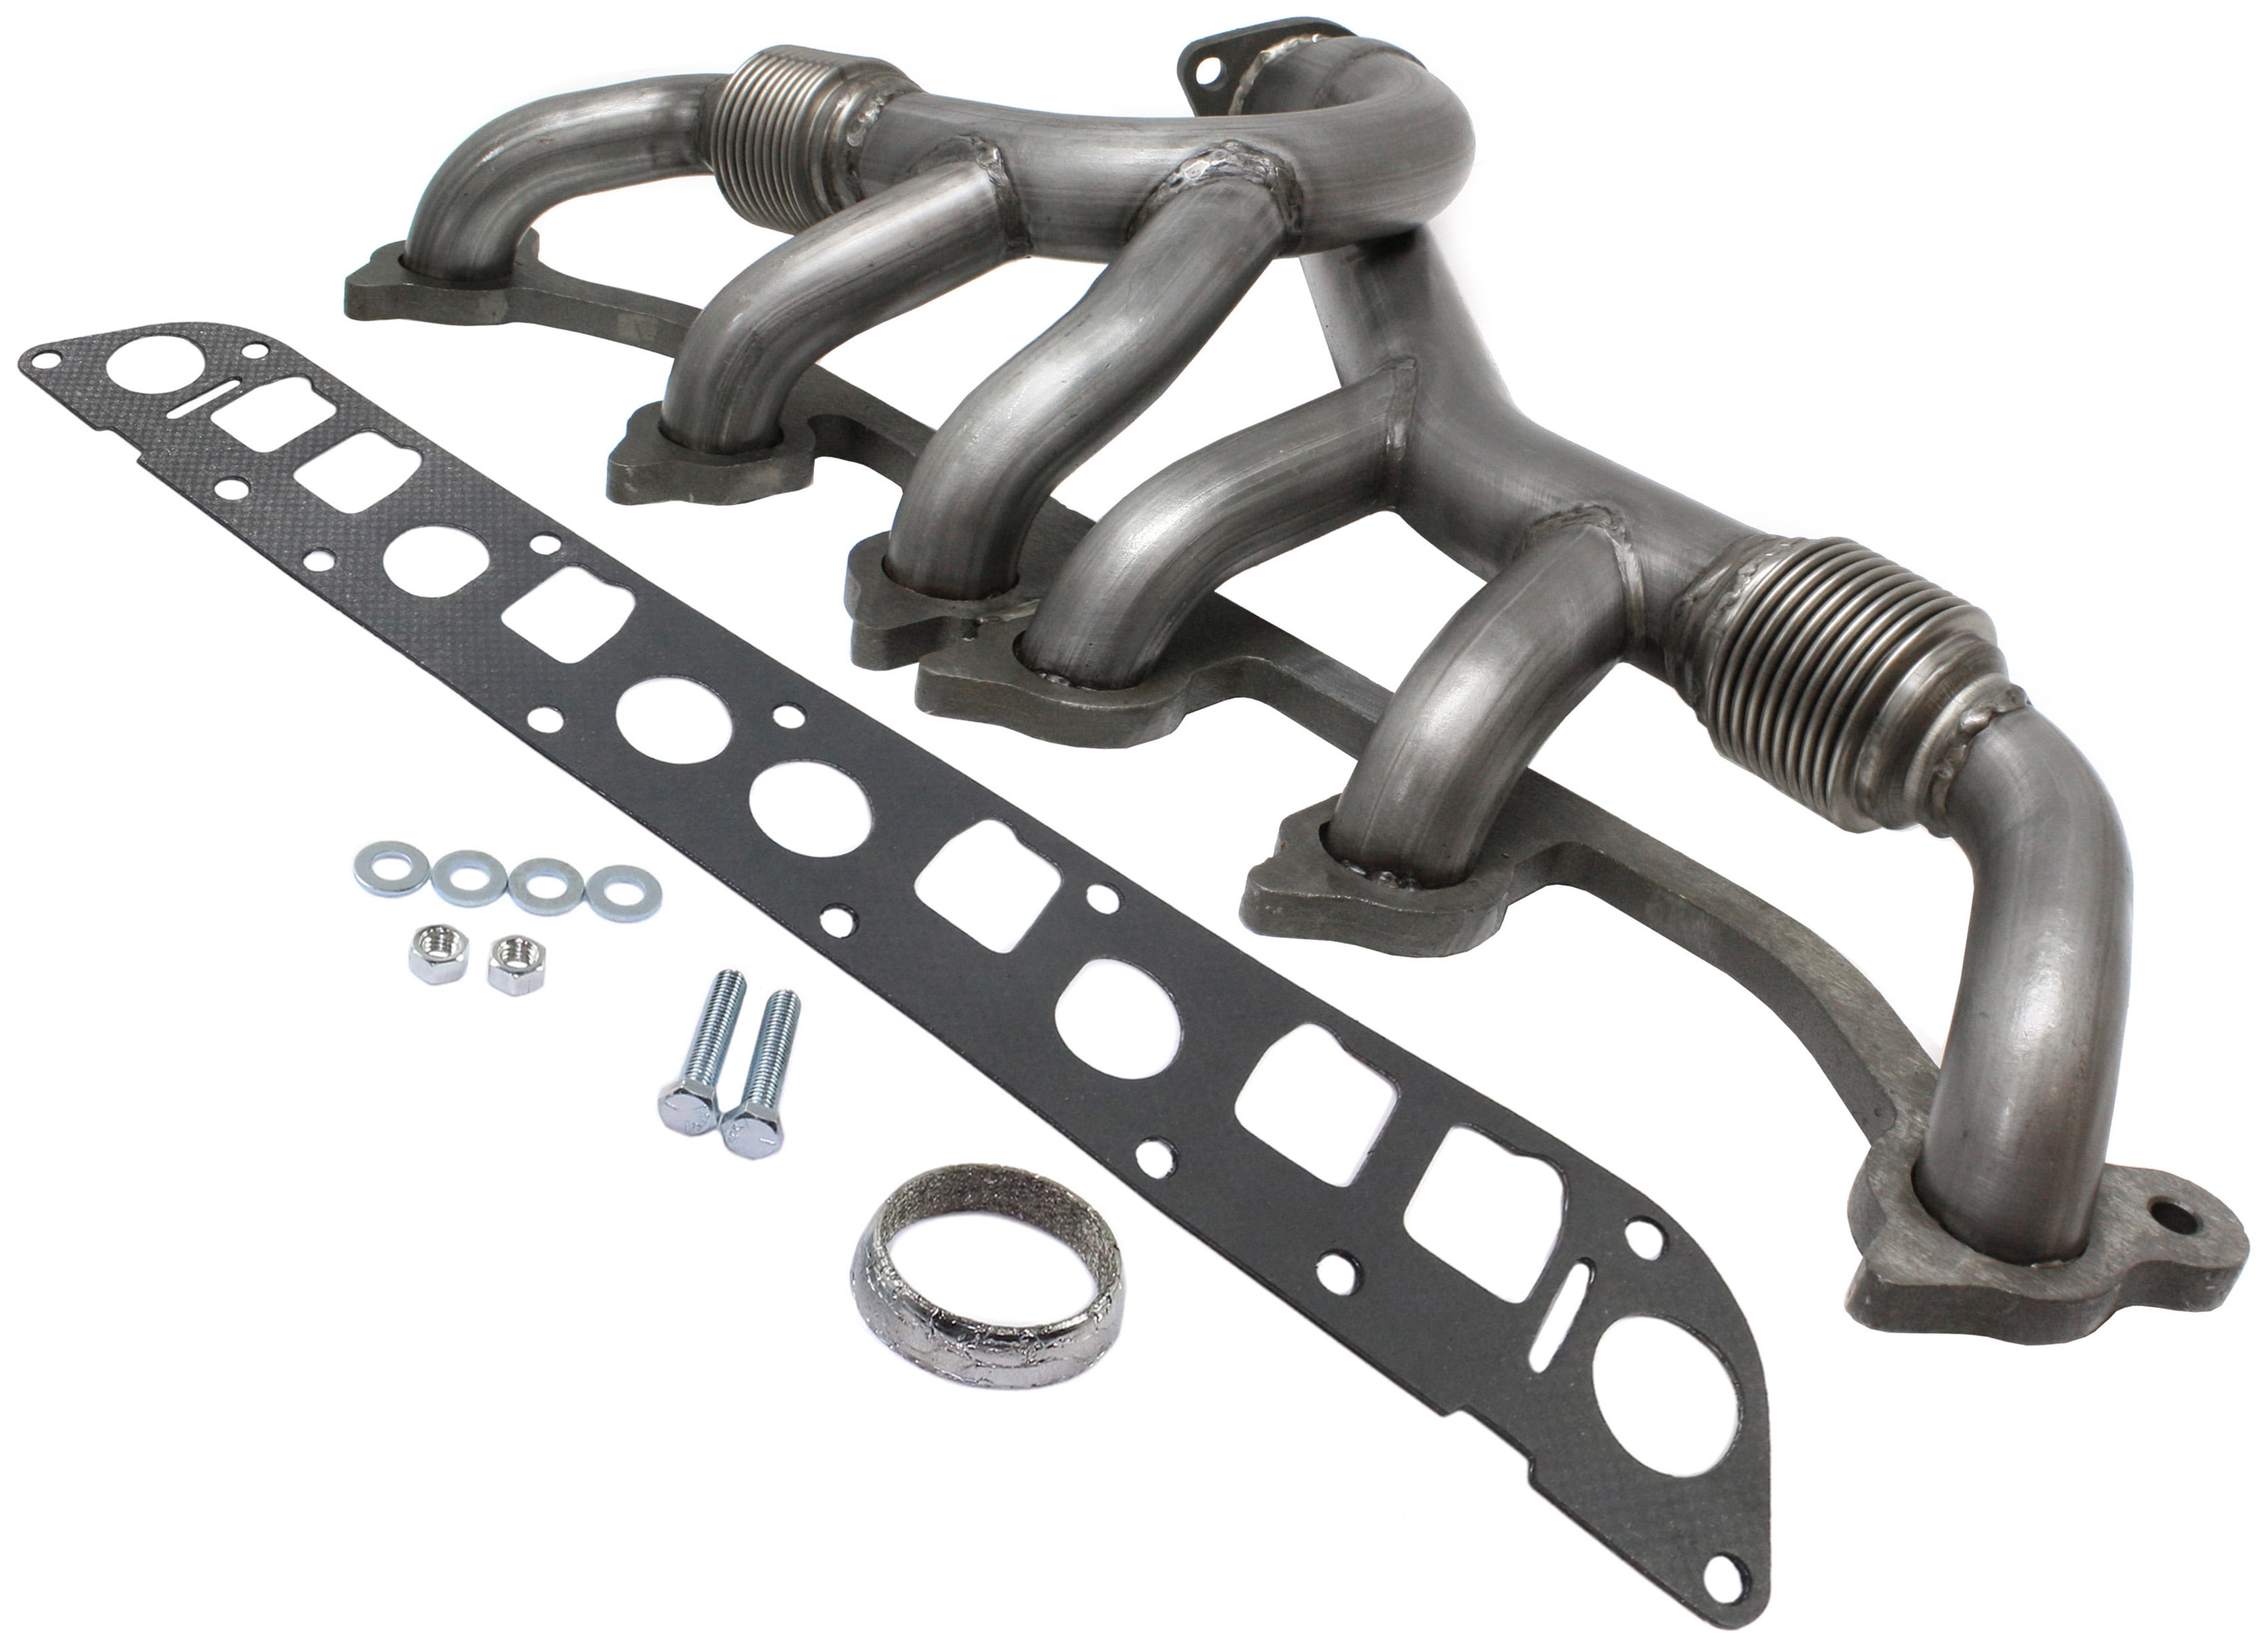 Exhaust Manifold Compatible with 1991-1999 Jeep Cherokee 1991-1992 Jeep  Comanche 1993-1998 Jeep Grand Cherokee 1997-1999 Jeep TJ 1991-1995 Jeep  Wrangler 1997-1999 Jeep Wrangler 6Cyl  